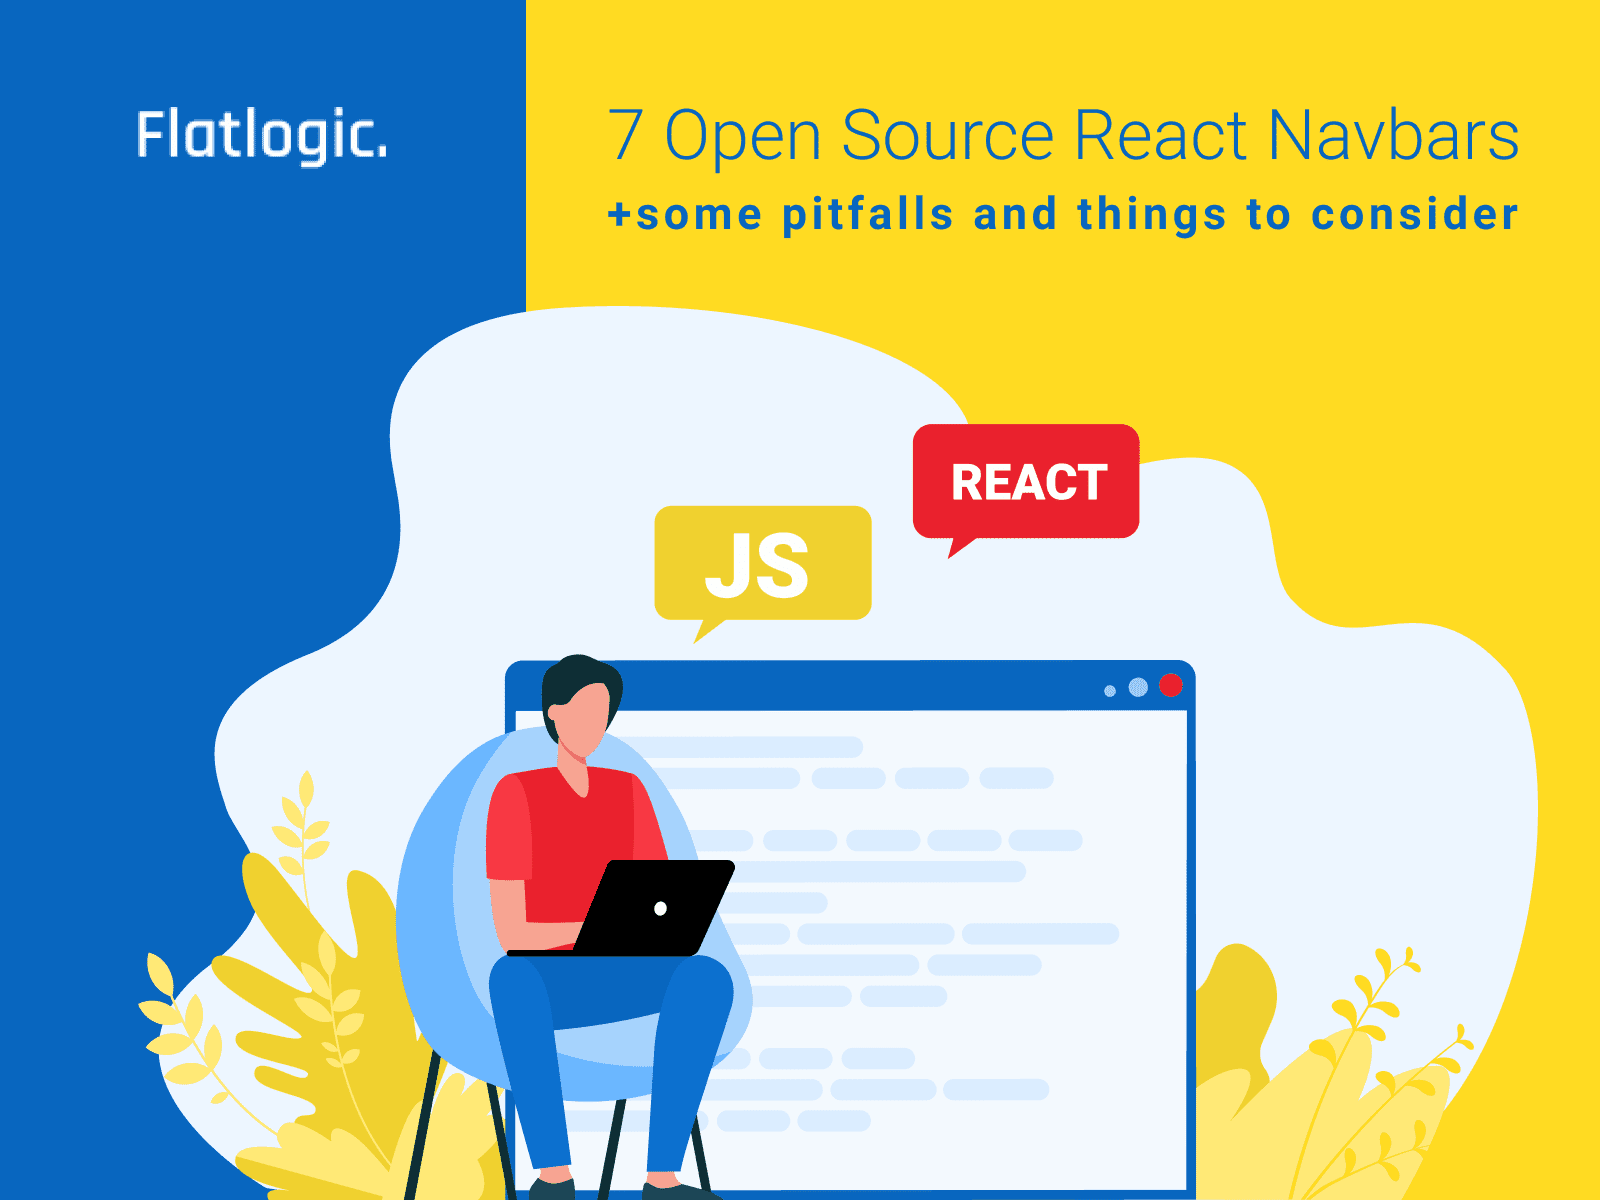 7 Open Source React Navbars + Some Pitfalls and Things to Consider